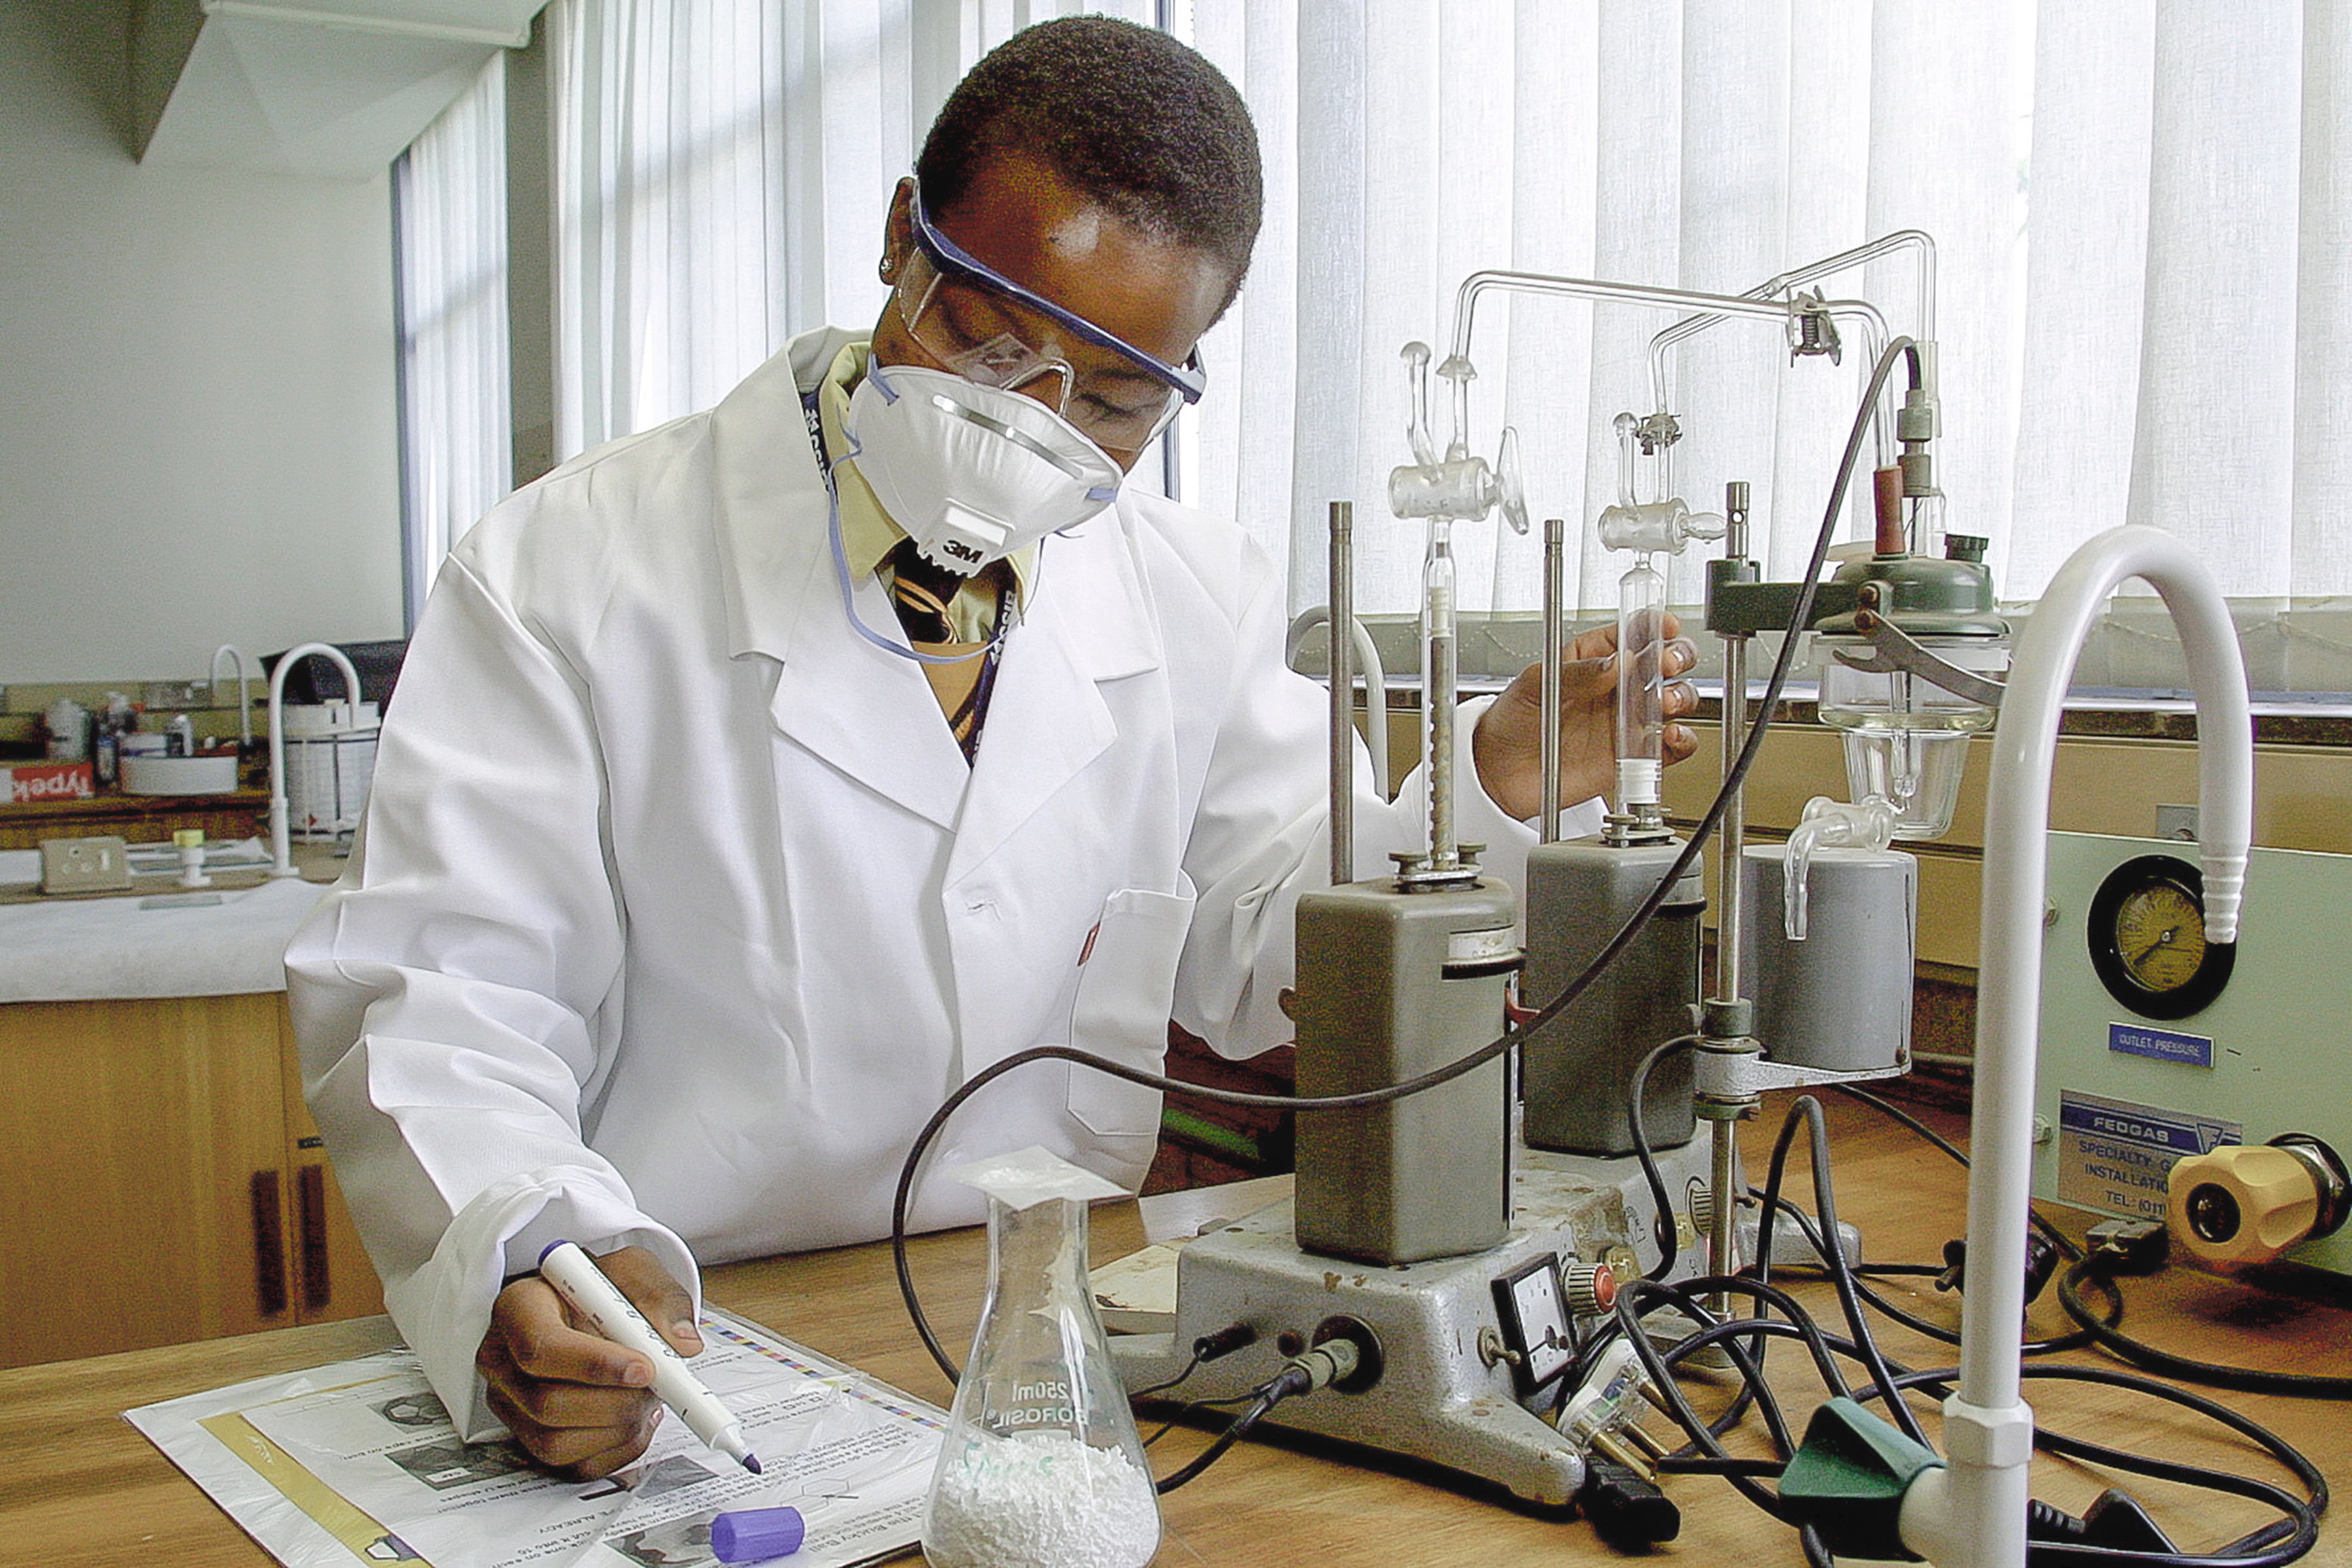 A scientist, wearing a lab coat and a face mask, takes notes on an experiment.